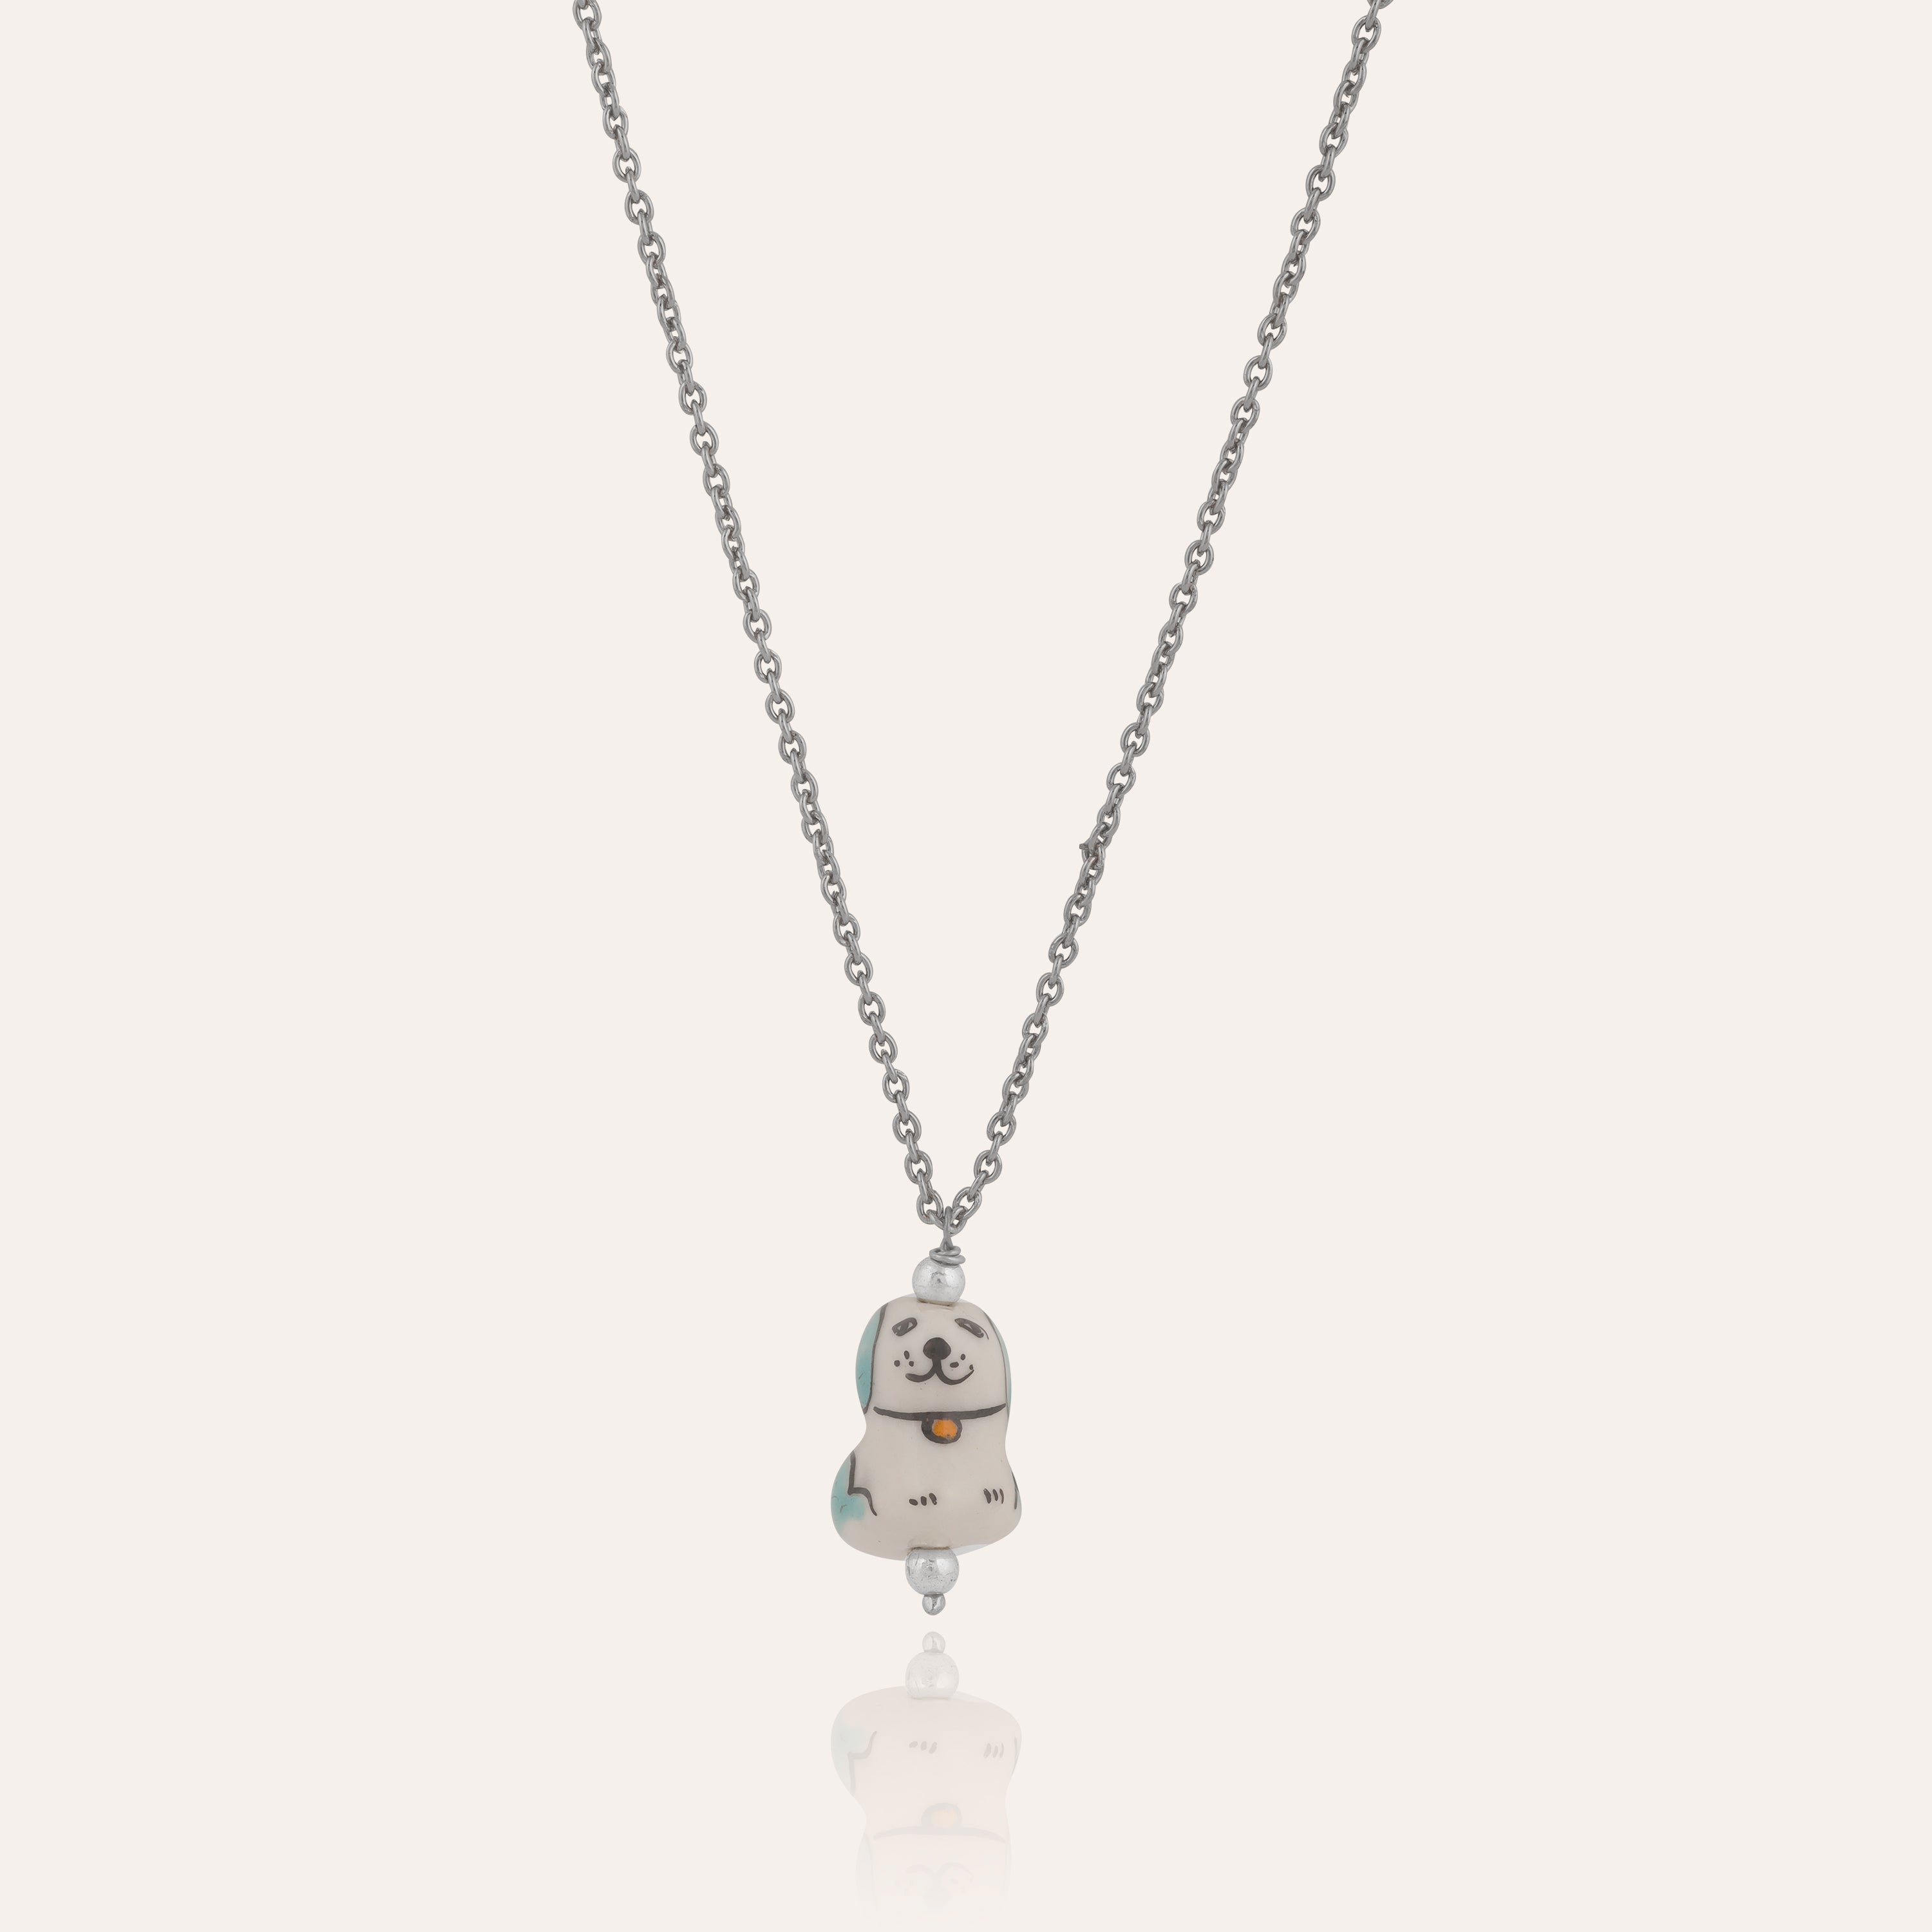 TFC Cute Puppy Bead Silver Plated Pendant Necklace-Enhance your elegance with our collection of gold-plated necklaces for women. Choose from stunning pendant necklaces, chic choker necklaces, and trendy layered necklaces. Our sleek and dainty designs are both affordable and anti-tarnish, ensuring lasting beauty. Enjoy the cheapest fashion jewellery, lightweight and stylish- only at The Fun Company.